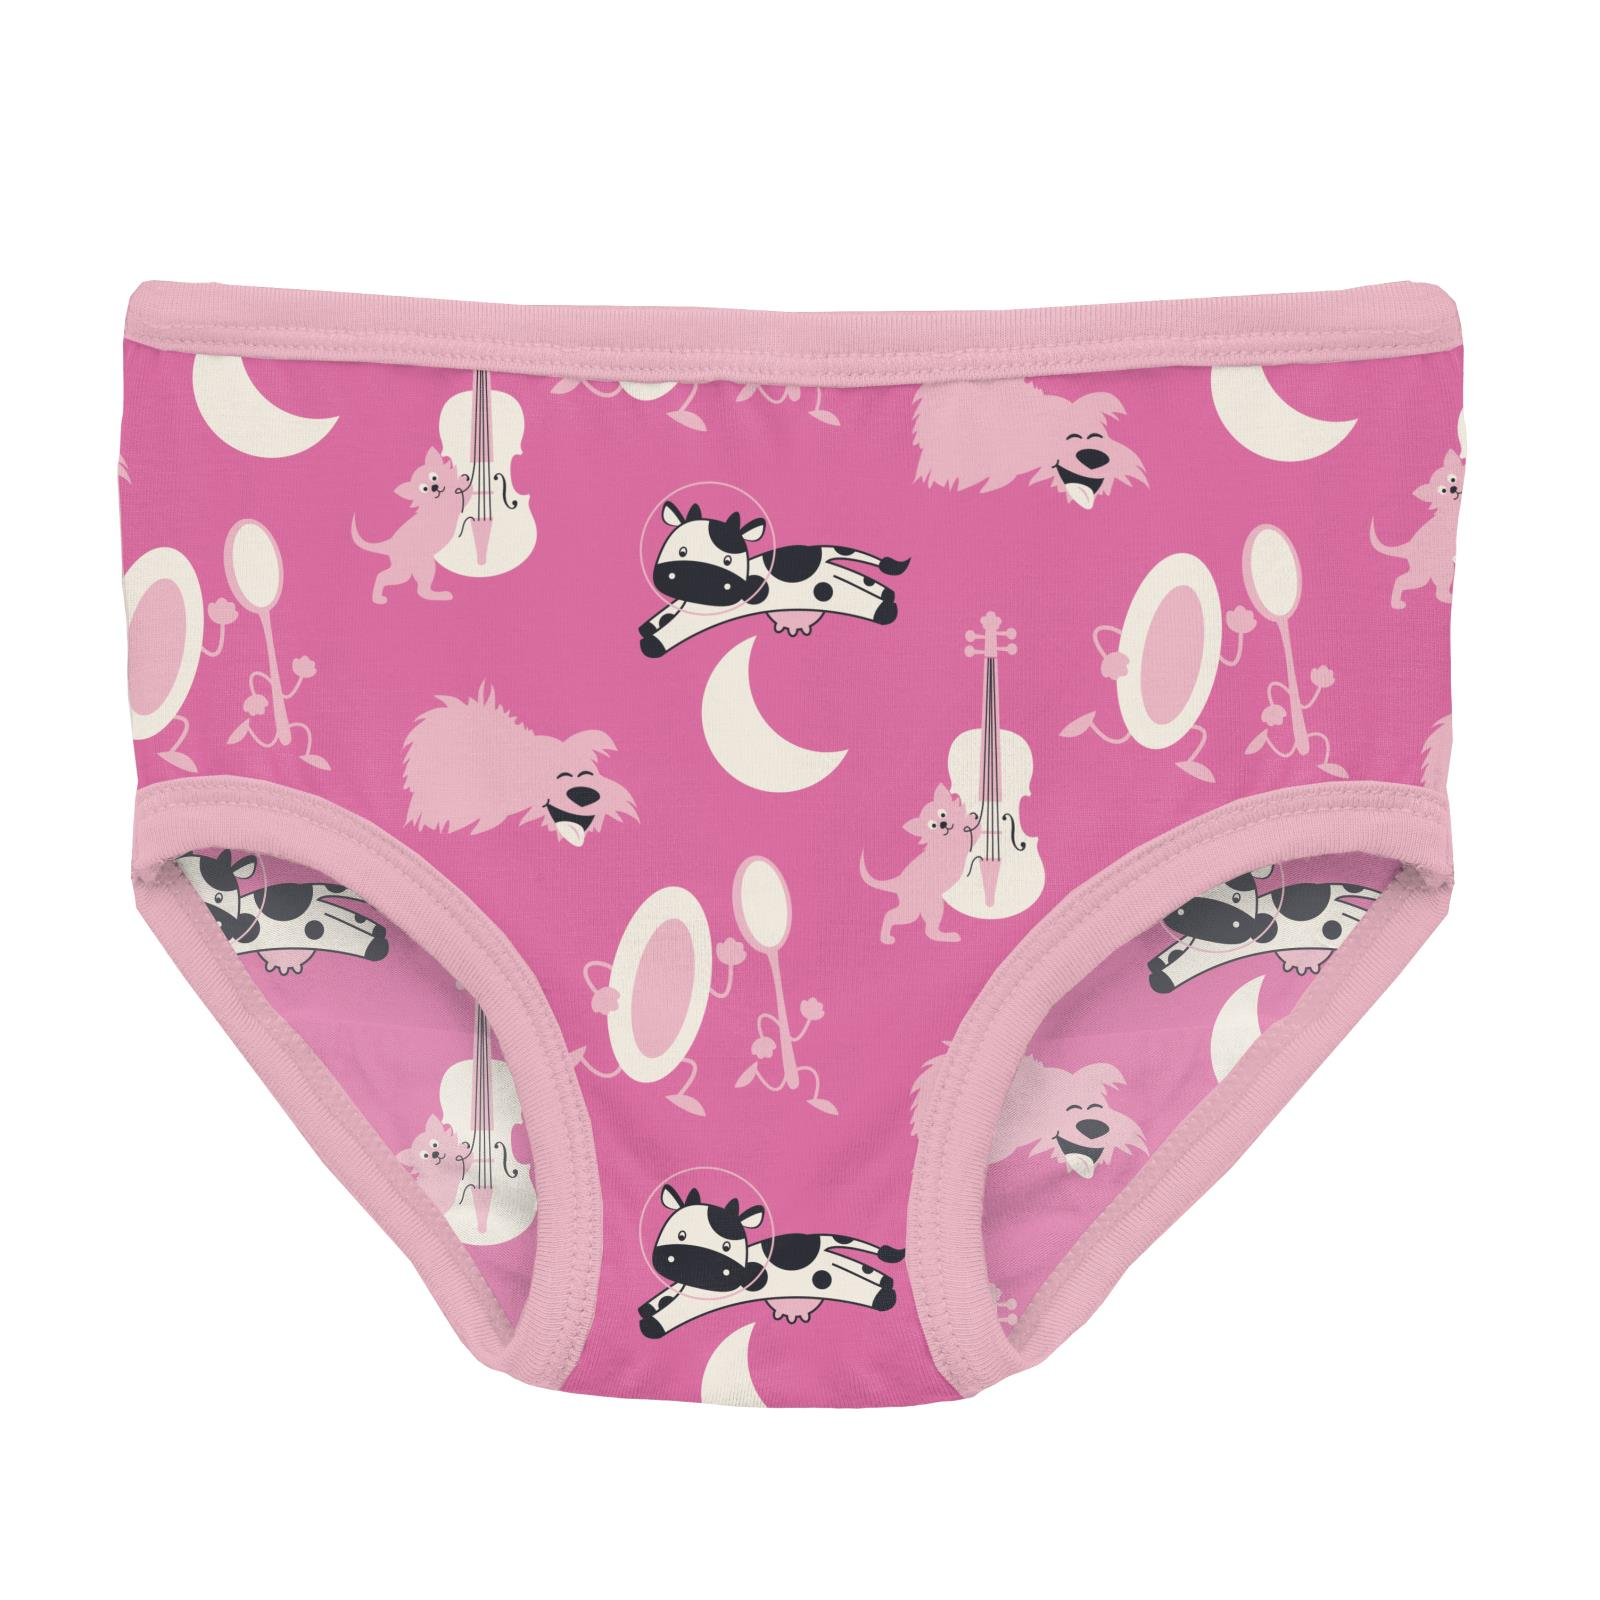 Kickee Pants Girls Print Underwear Set of 3 - Peace, Love and Happines –  Chicken Little Shop